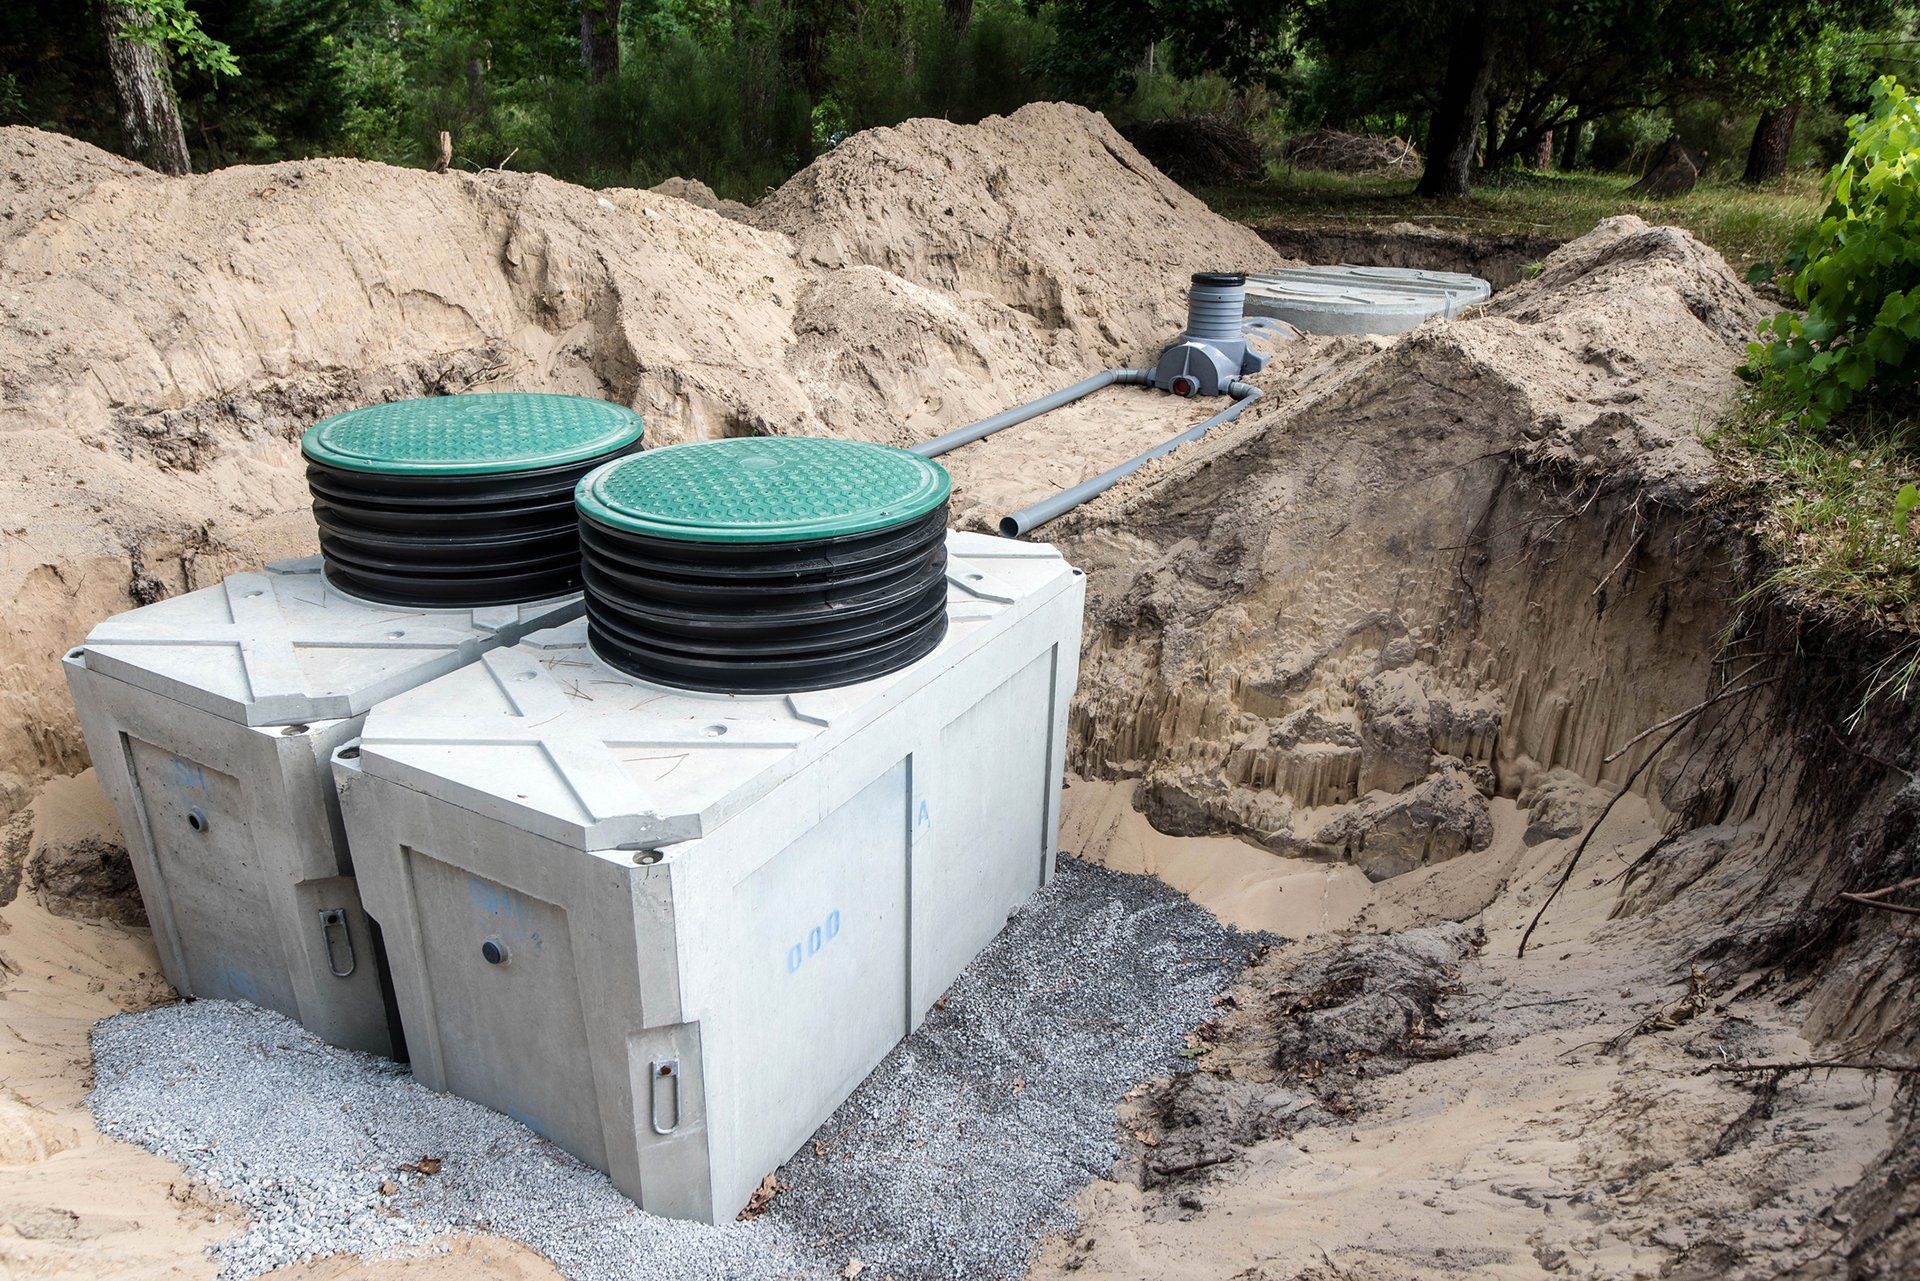 septic pumping systems in farmington, nh